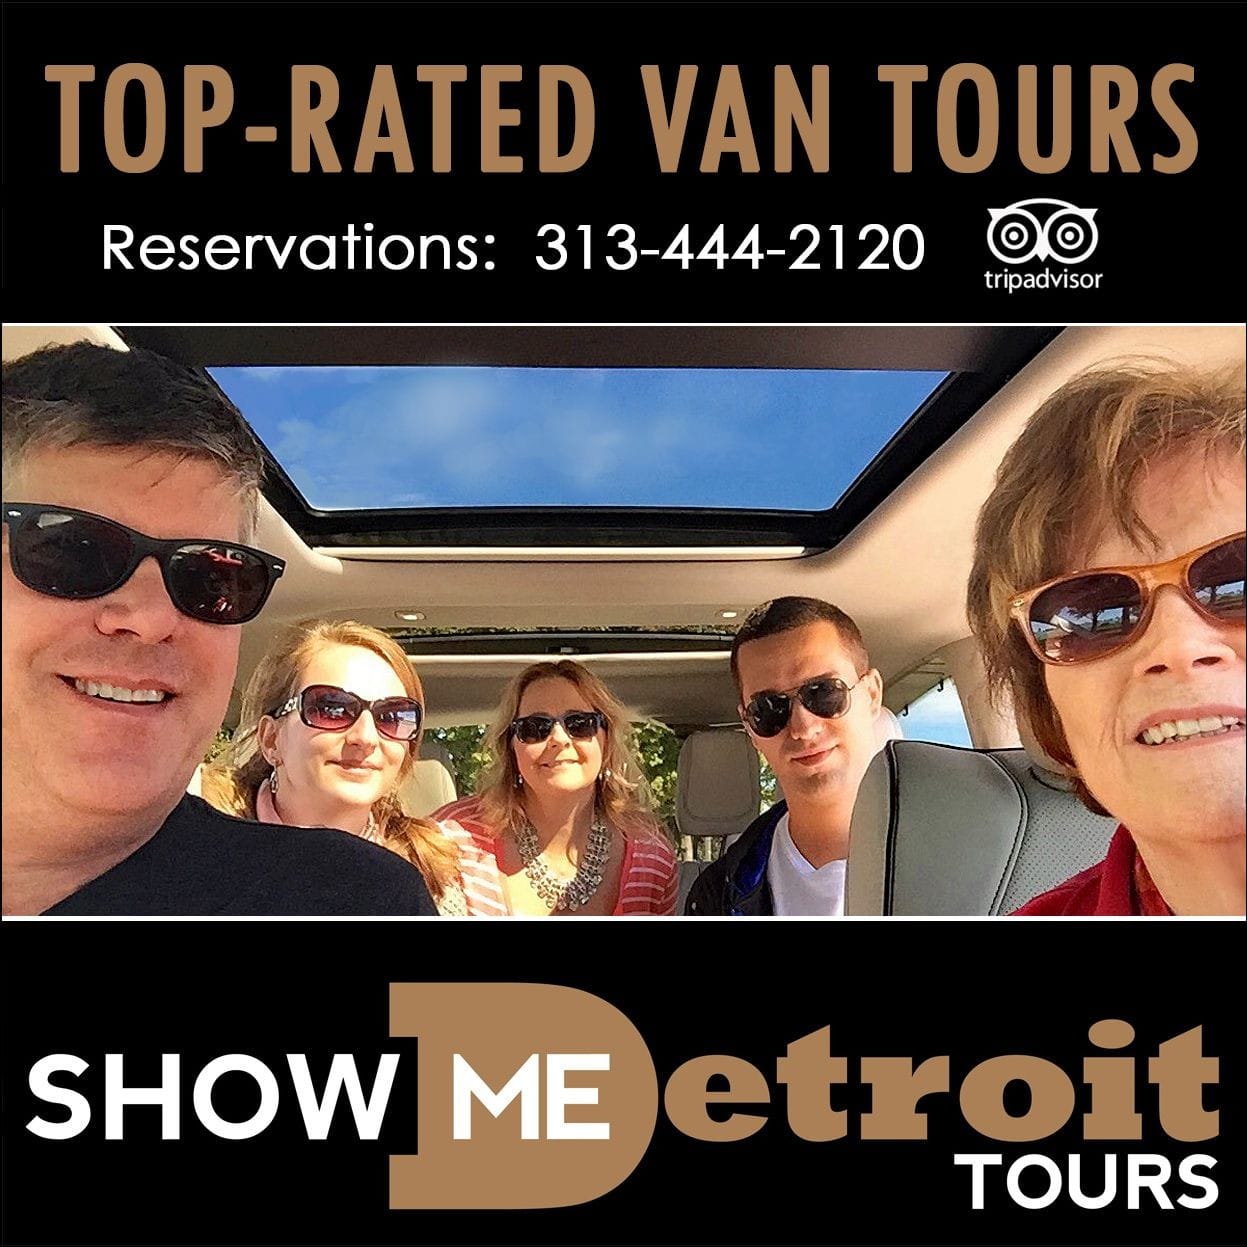 Tour guests are shown inside the Show Me Detroit Tours's van, with tour guide.